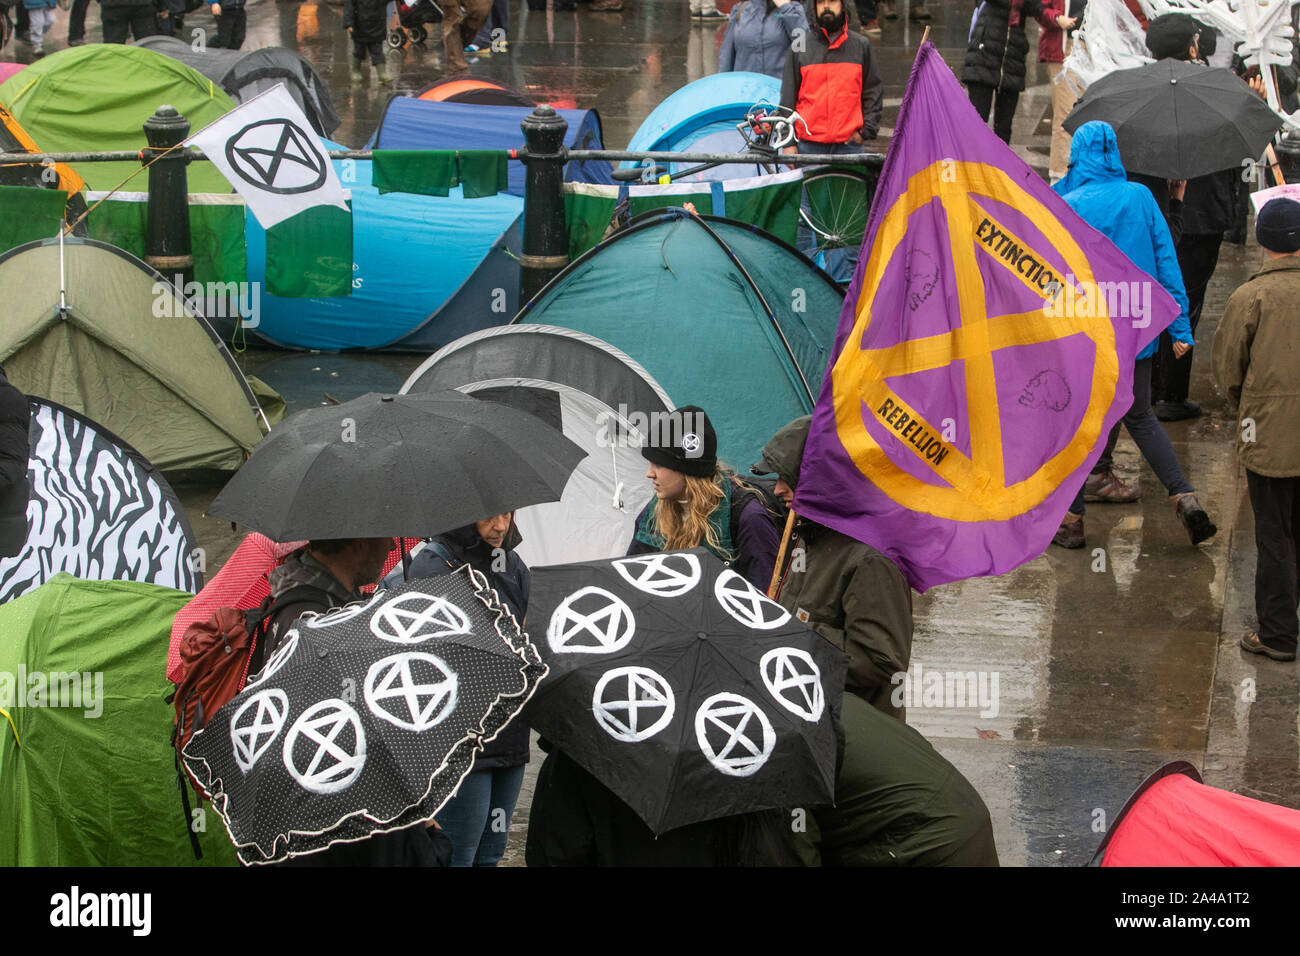 London, UK - 13 October 2019. Climate activists from Extinction Rebellion continue their protest for a seventh day  as they set up camp  in bivouacs in Trafalgar Square in an attempt to force the government to declare a climate emergency and meet their demands to reduce to zero carbon emmissions by 2025. Credit: amer ghazzal/Alamy Live News Stock Photo